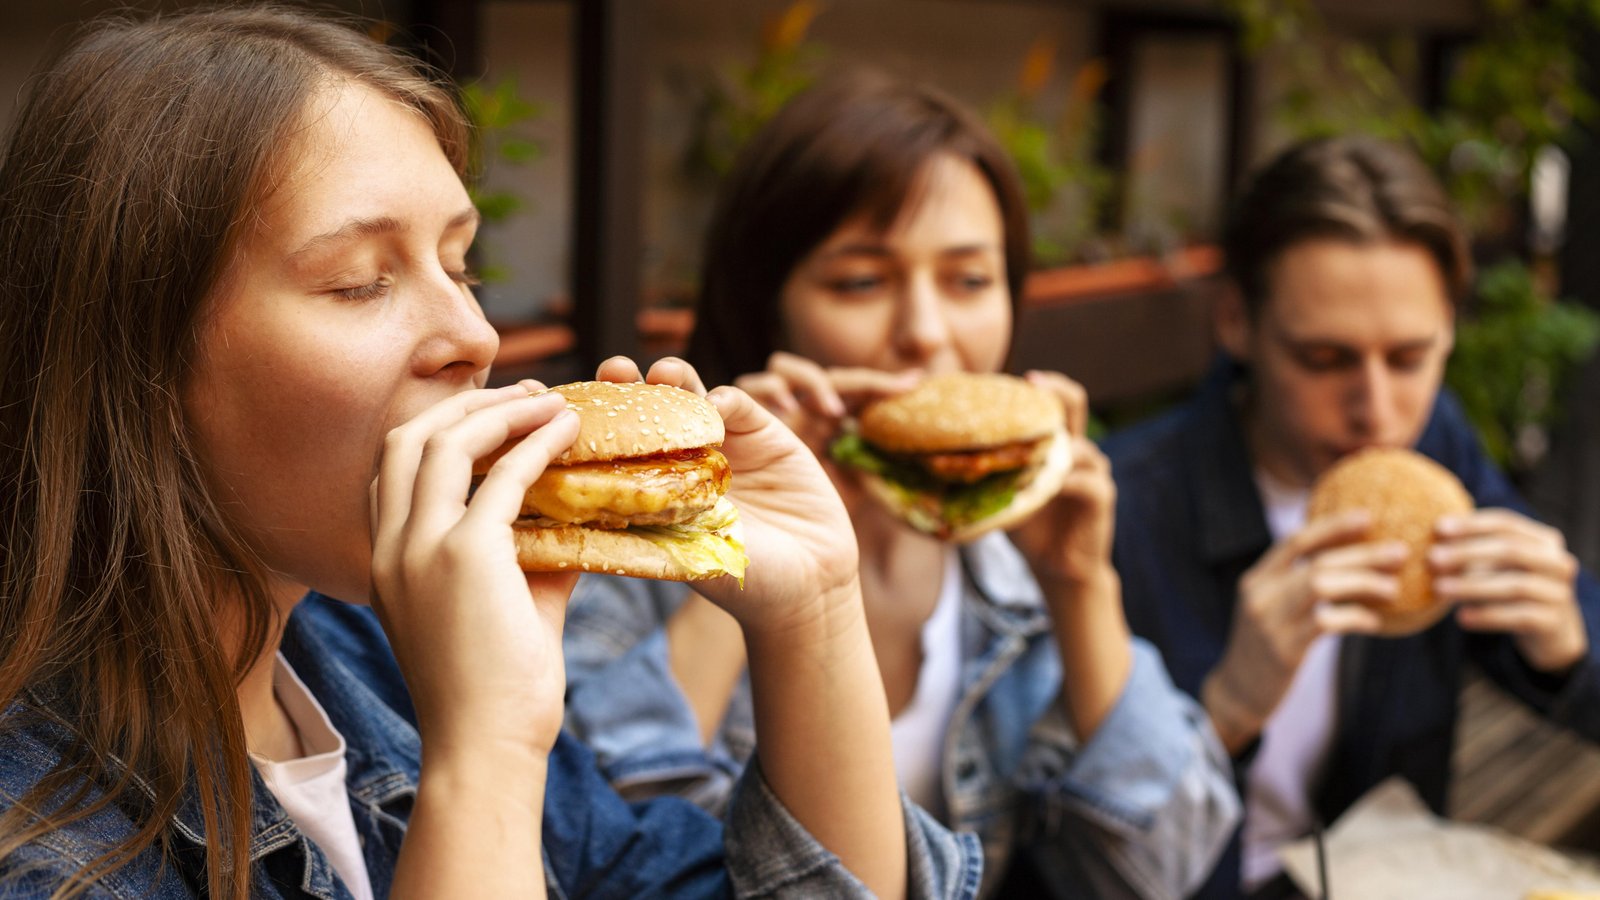 American Diet Quality Improved Modestly But Still Long Way To Go: Report